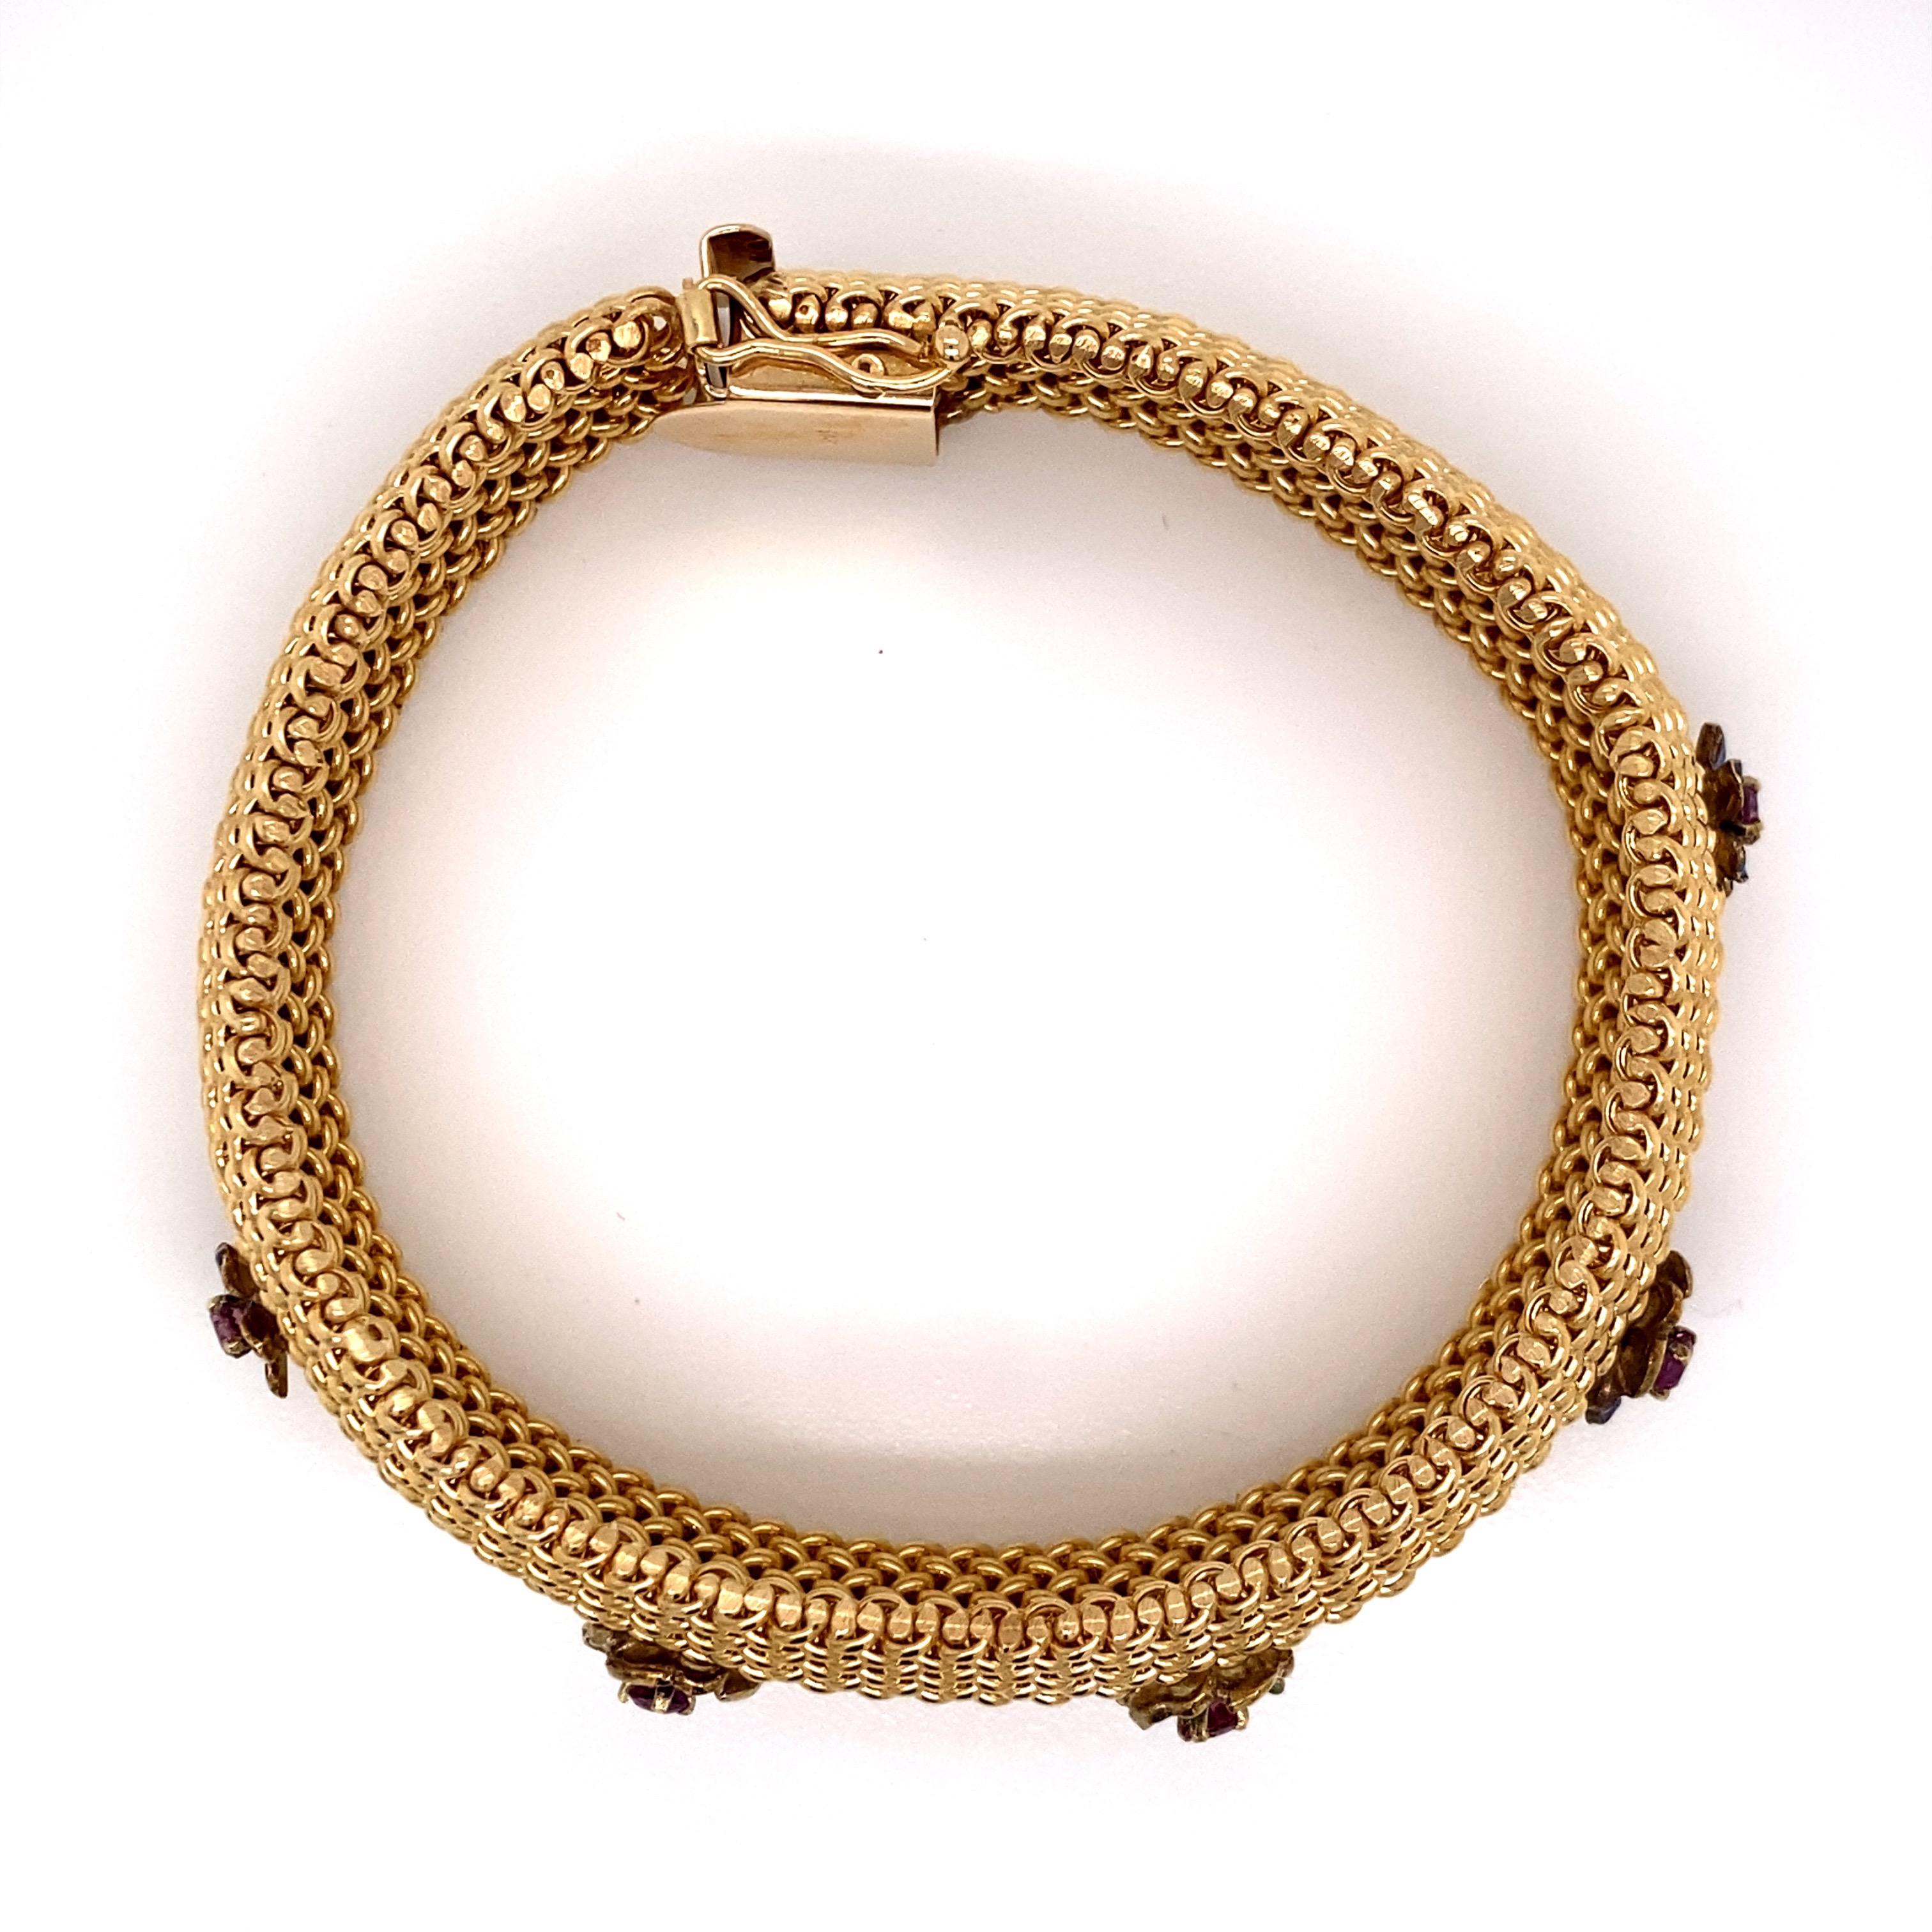 Modern Vintage 1960s 14 Karat Yellow Gold Mesh Bracelet with Enamel Flowers and Rubies For Sale